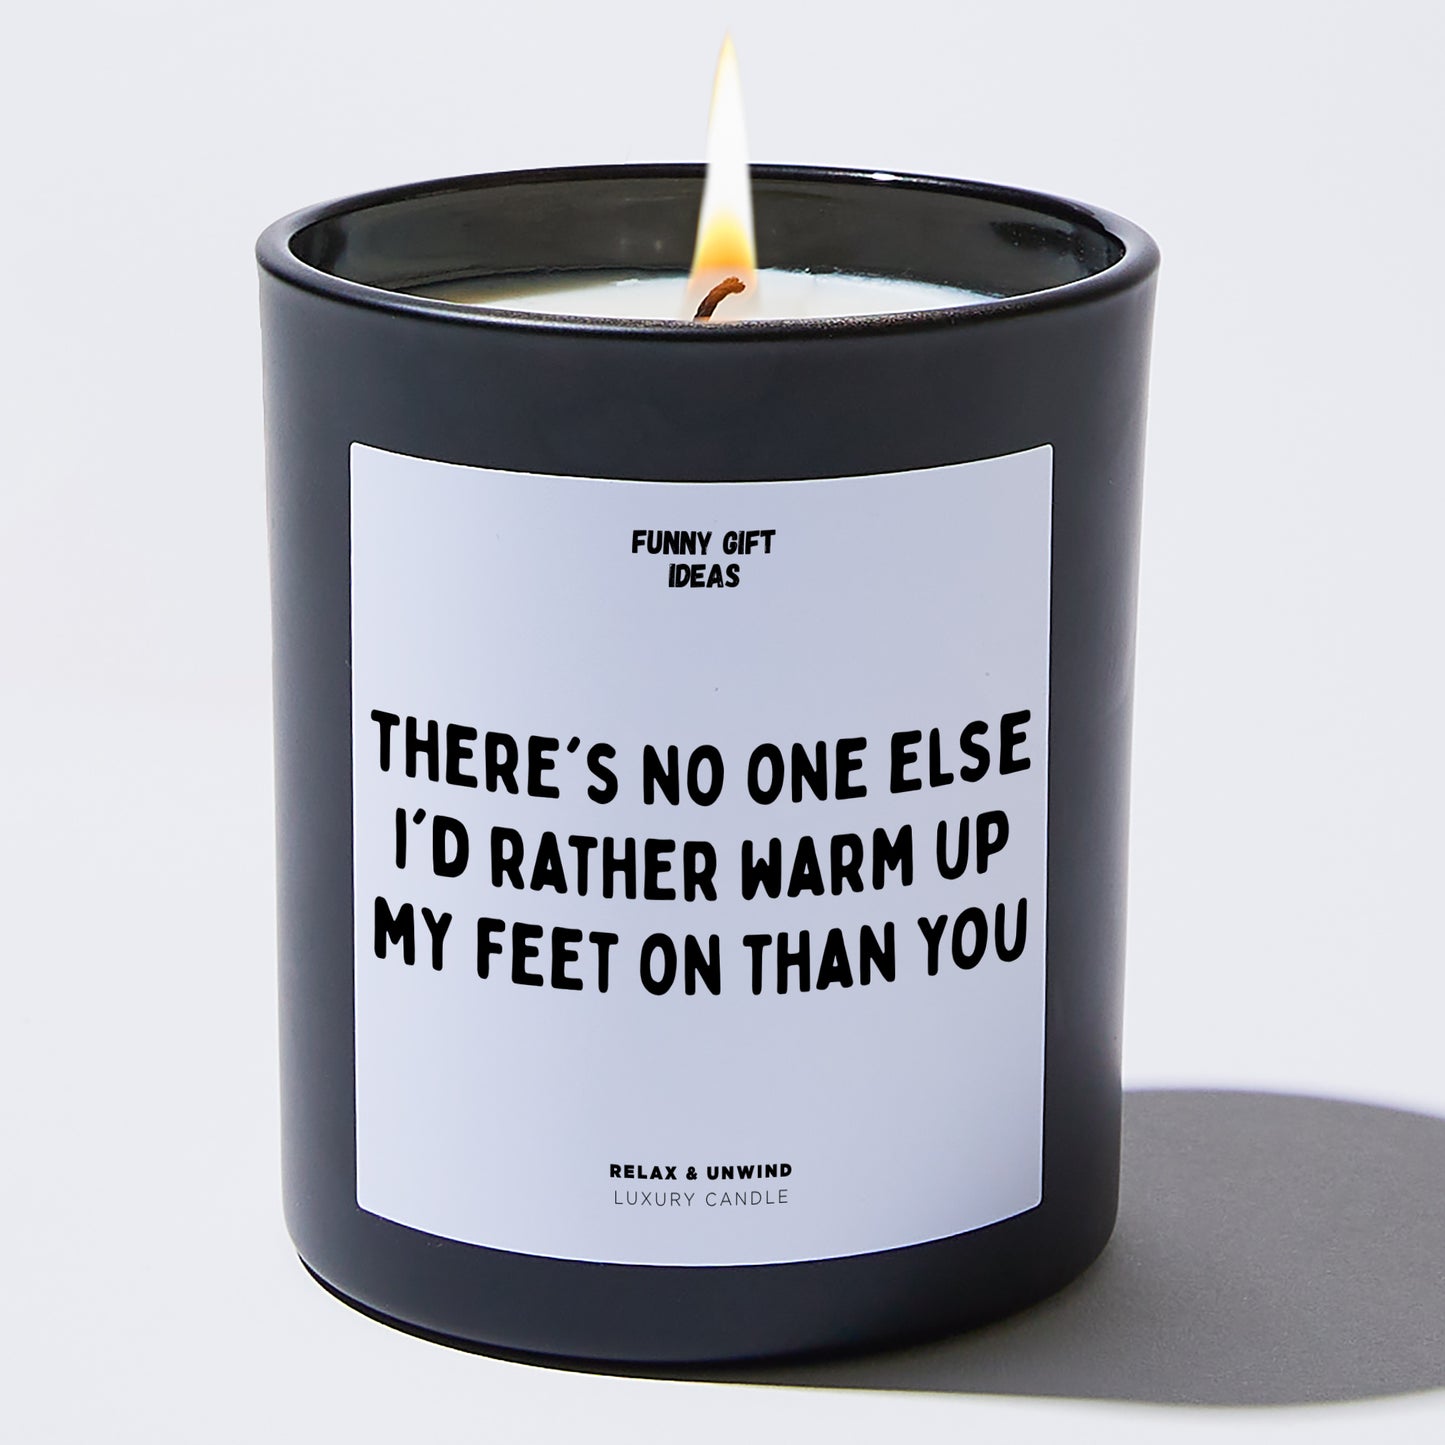 Anniversary There's No One Else I'd Rather Warm Up My Feet on Than You - Funny Gift Ideas